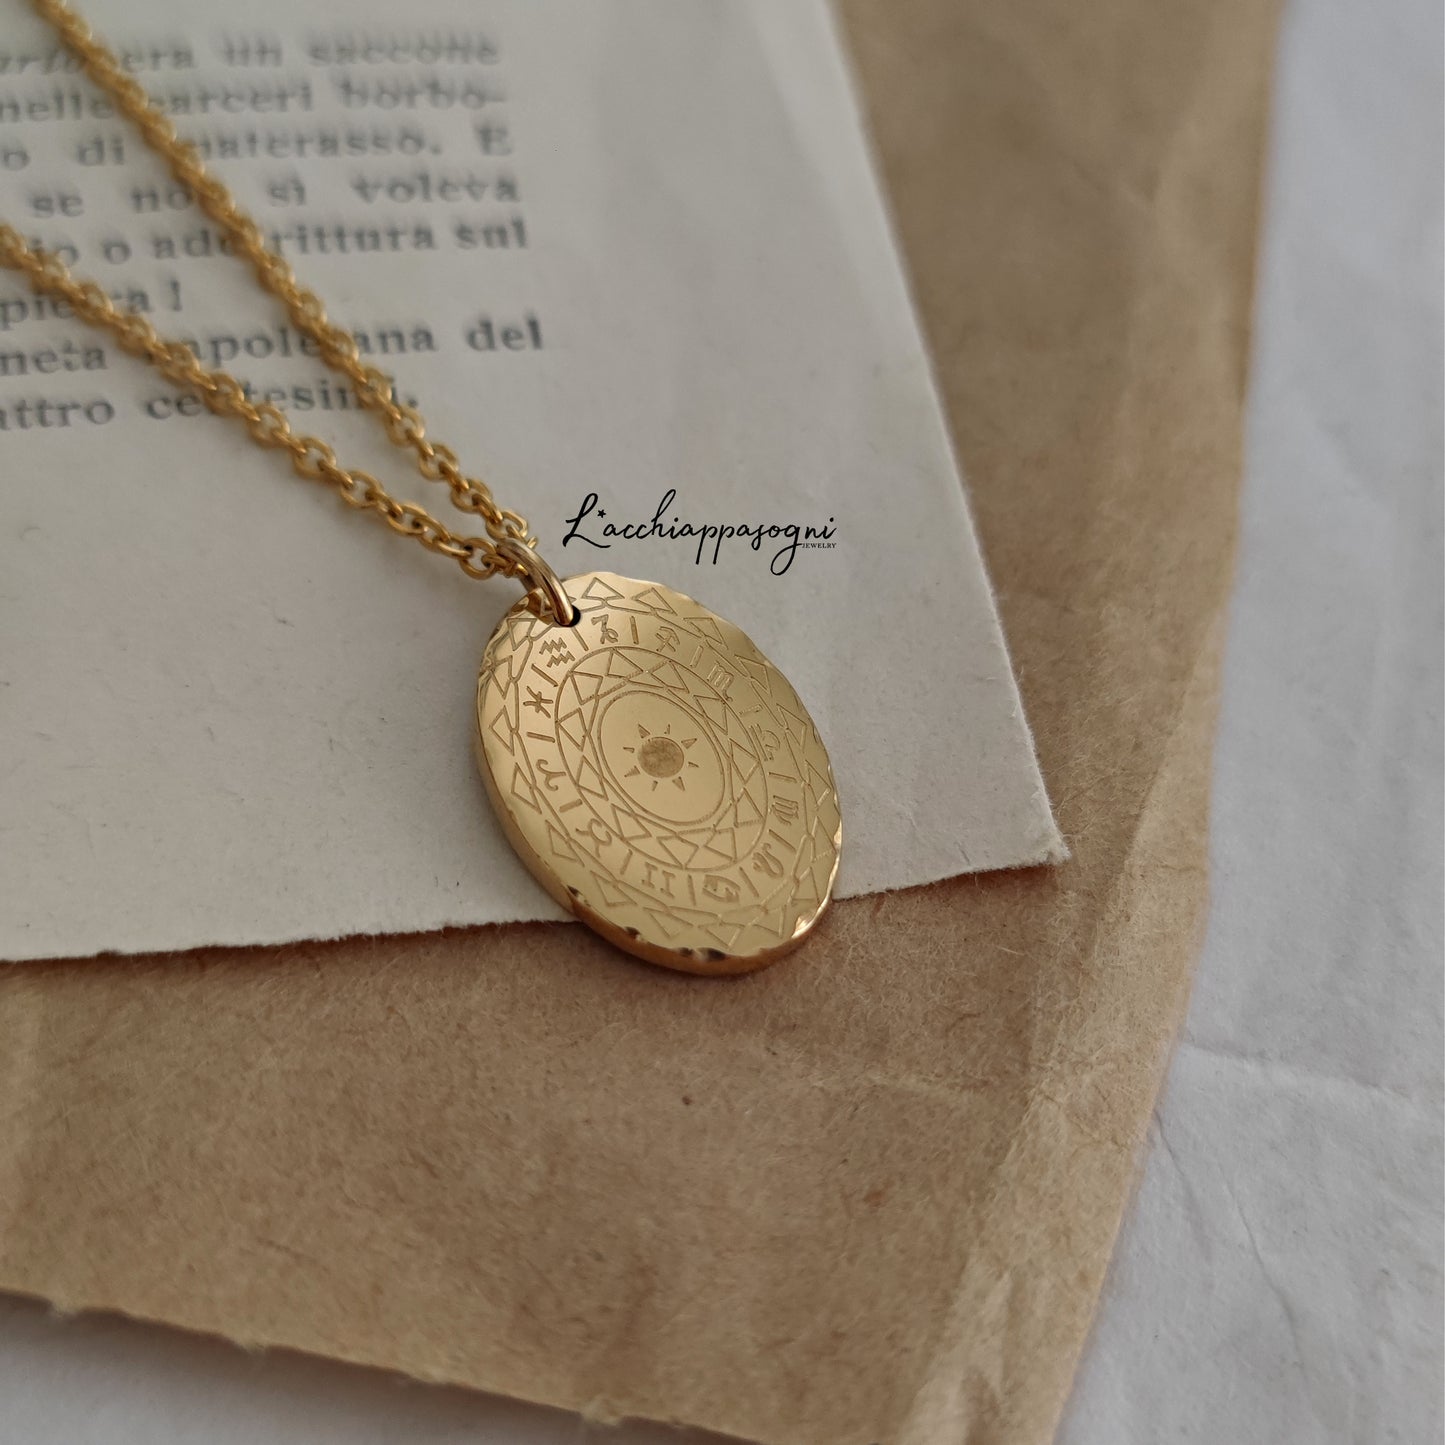 The Zodiac necklace, 14k gold plated stainless steel